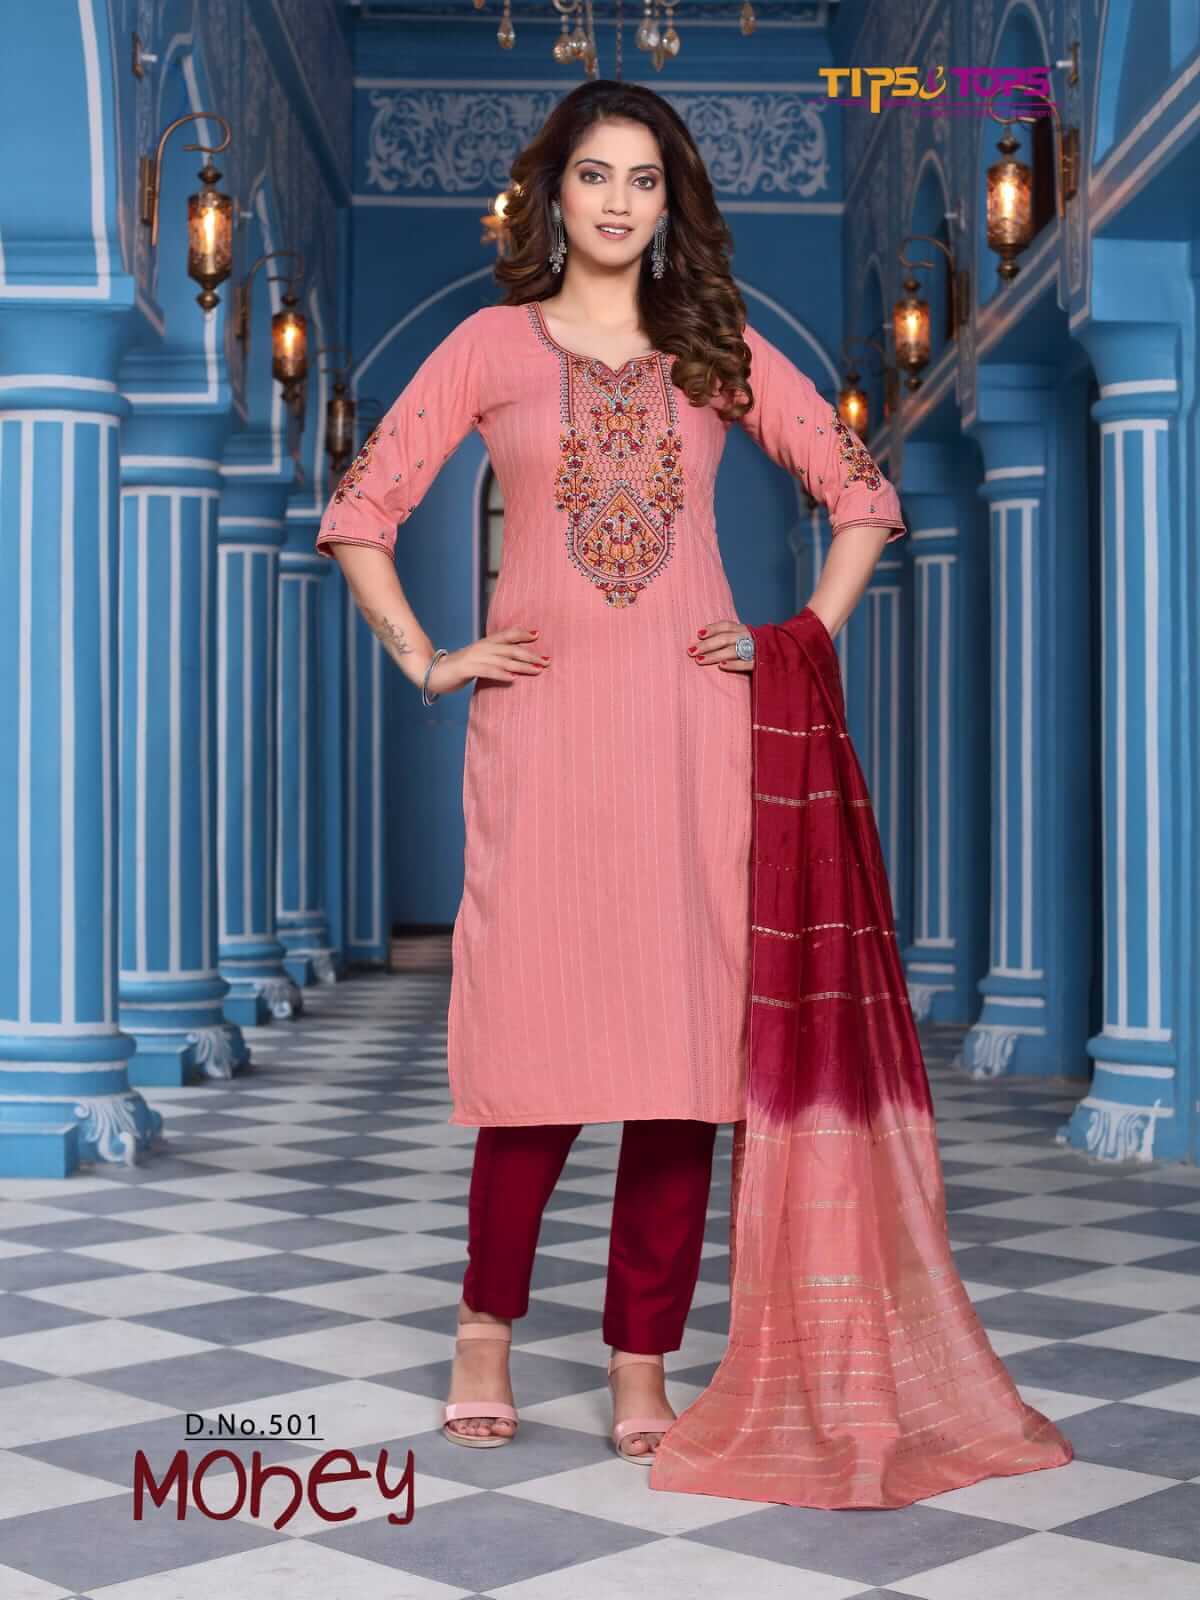 Tips and Tops Mohey vol 5 Embroidery Salwar Kameez Catalog collection 2